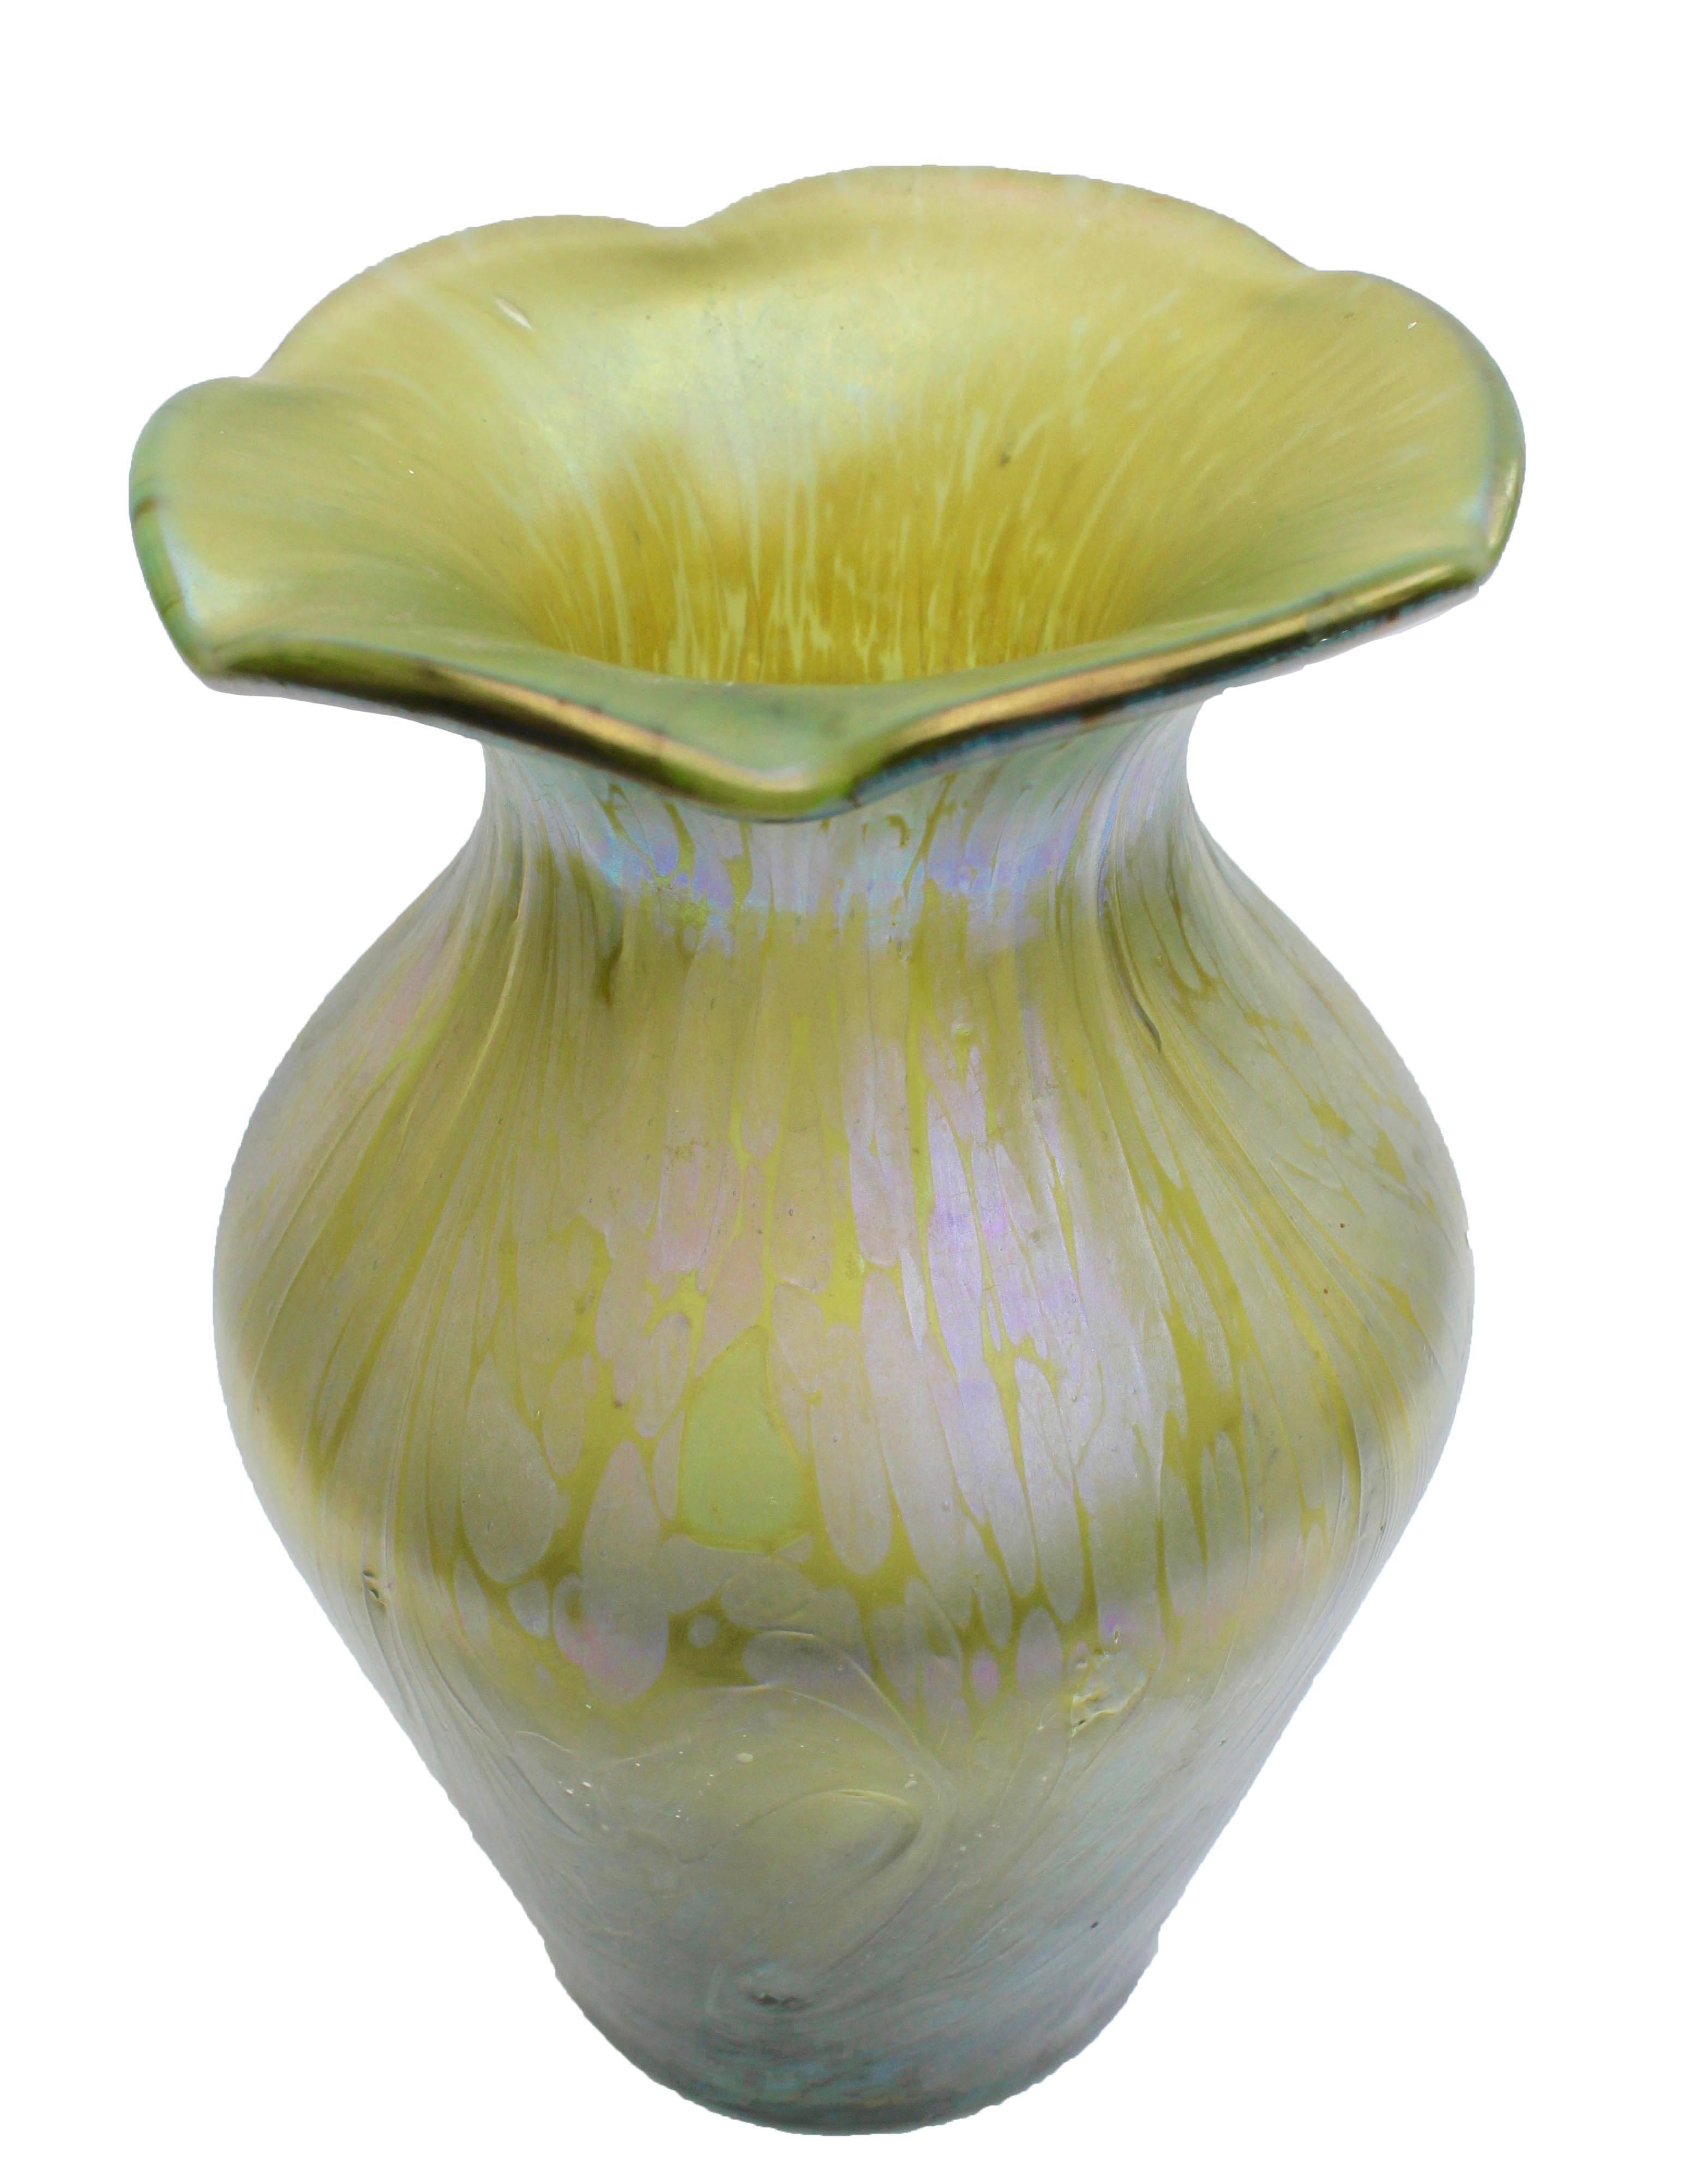 Neo Art Nouveau vase, Arte Nova Edition, Schott Zwiesel, 1970.
Thick-walled glass wavy edge, in the style of Loetz.
Bottom with etching brand AS. Measure: height 23 cm.
An spectacular decorative design.
 